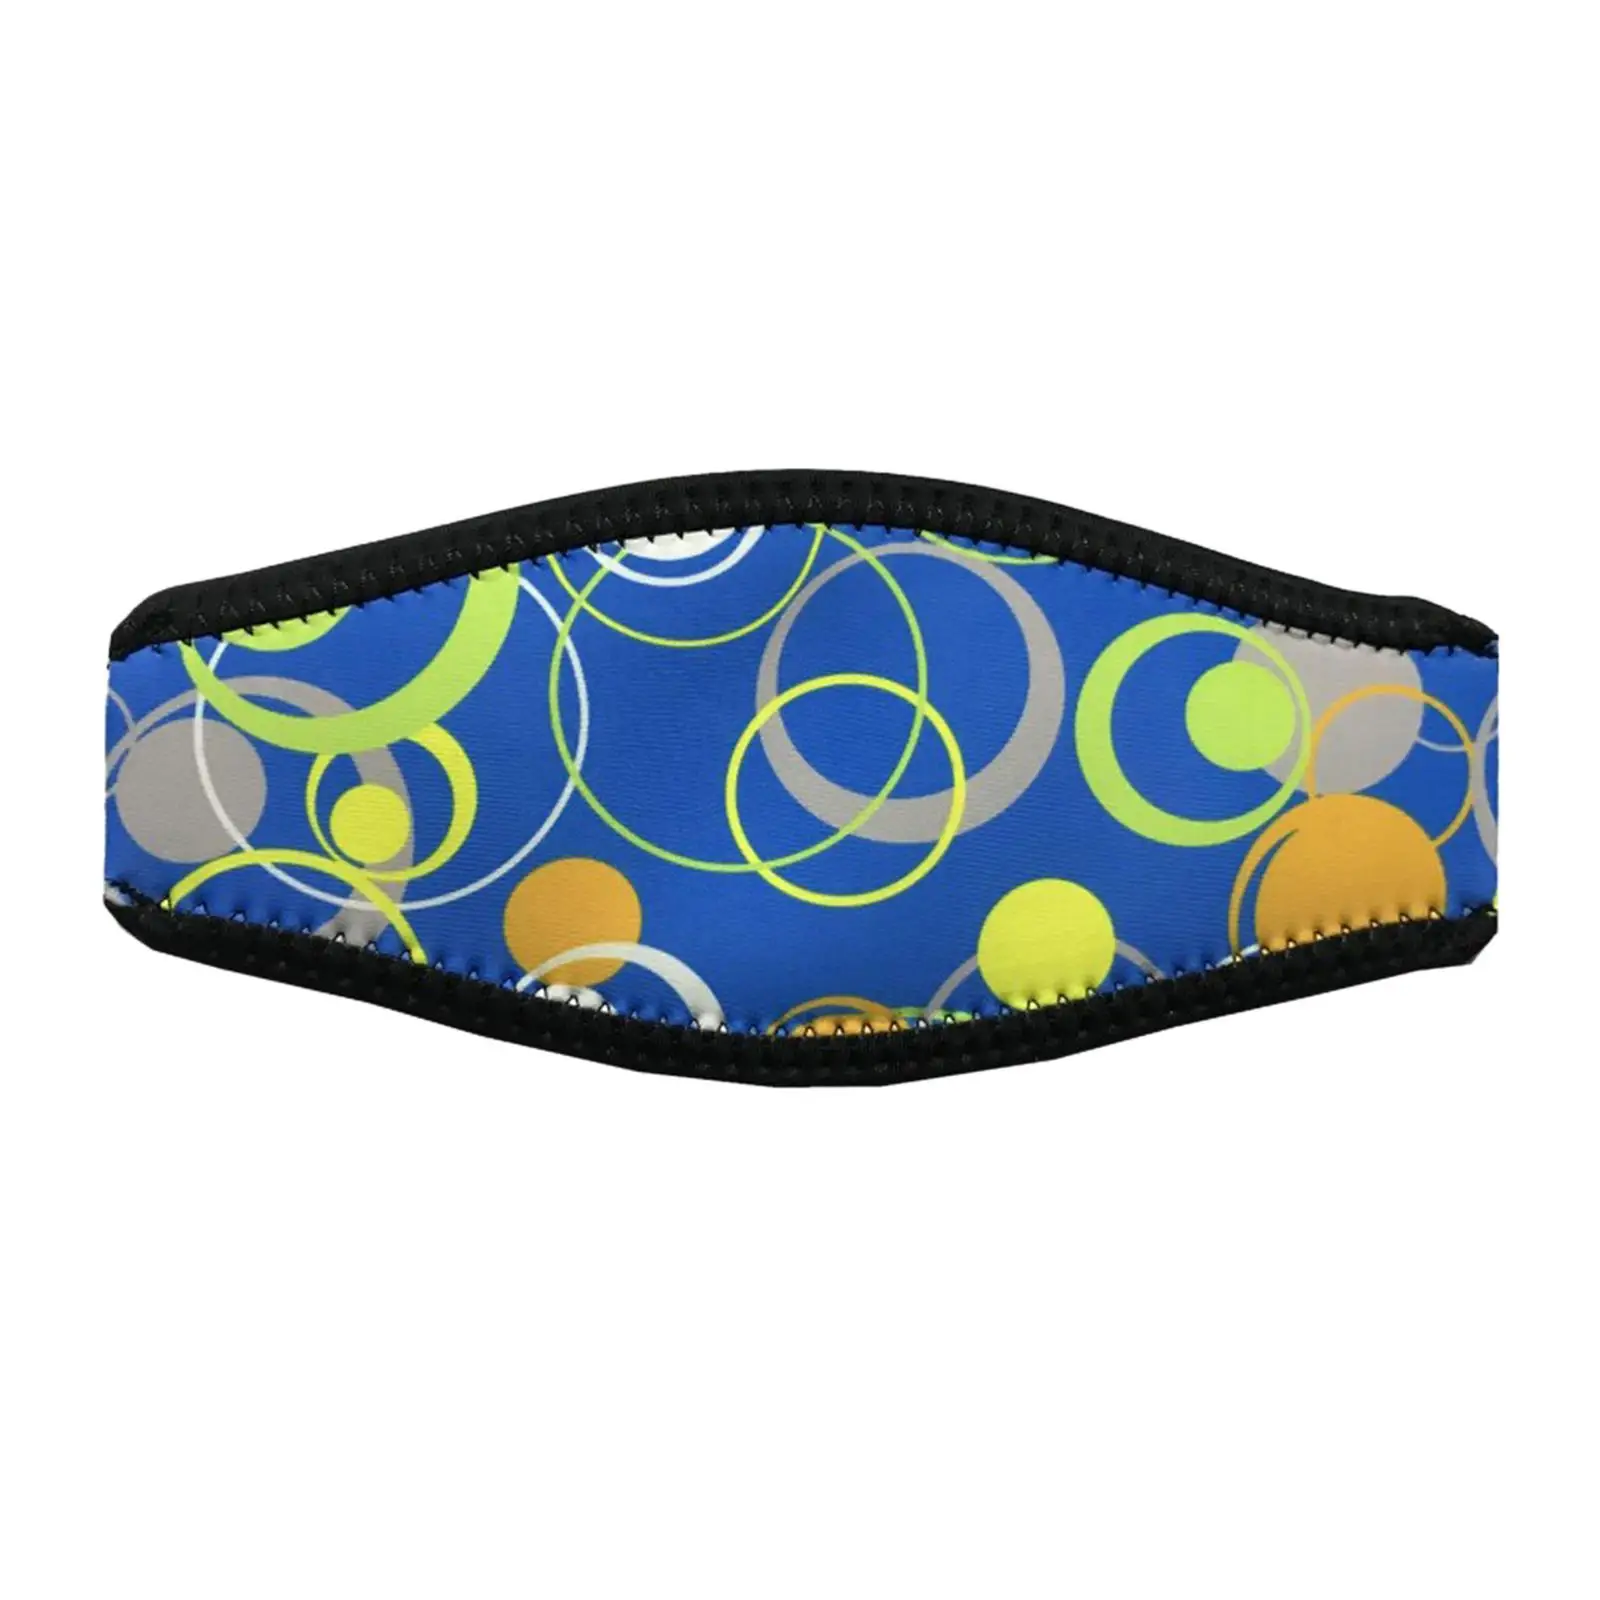 Dive, Diving Eyeglasses Strap Cover Diving Cover for Scuba Diving Adult Water Sports